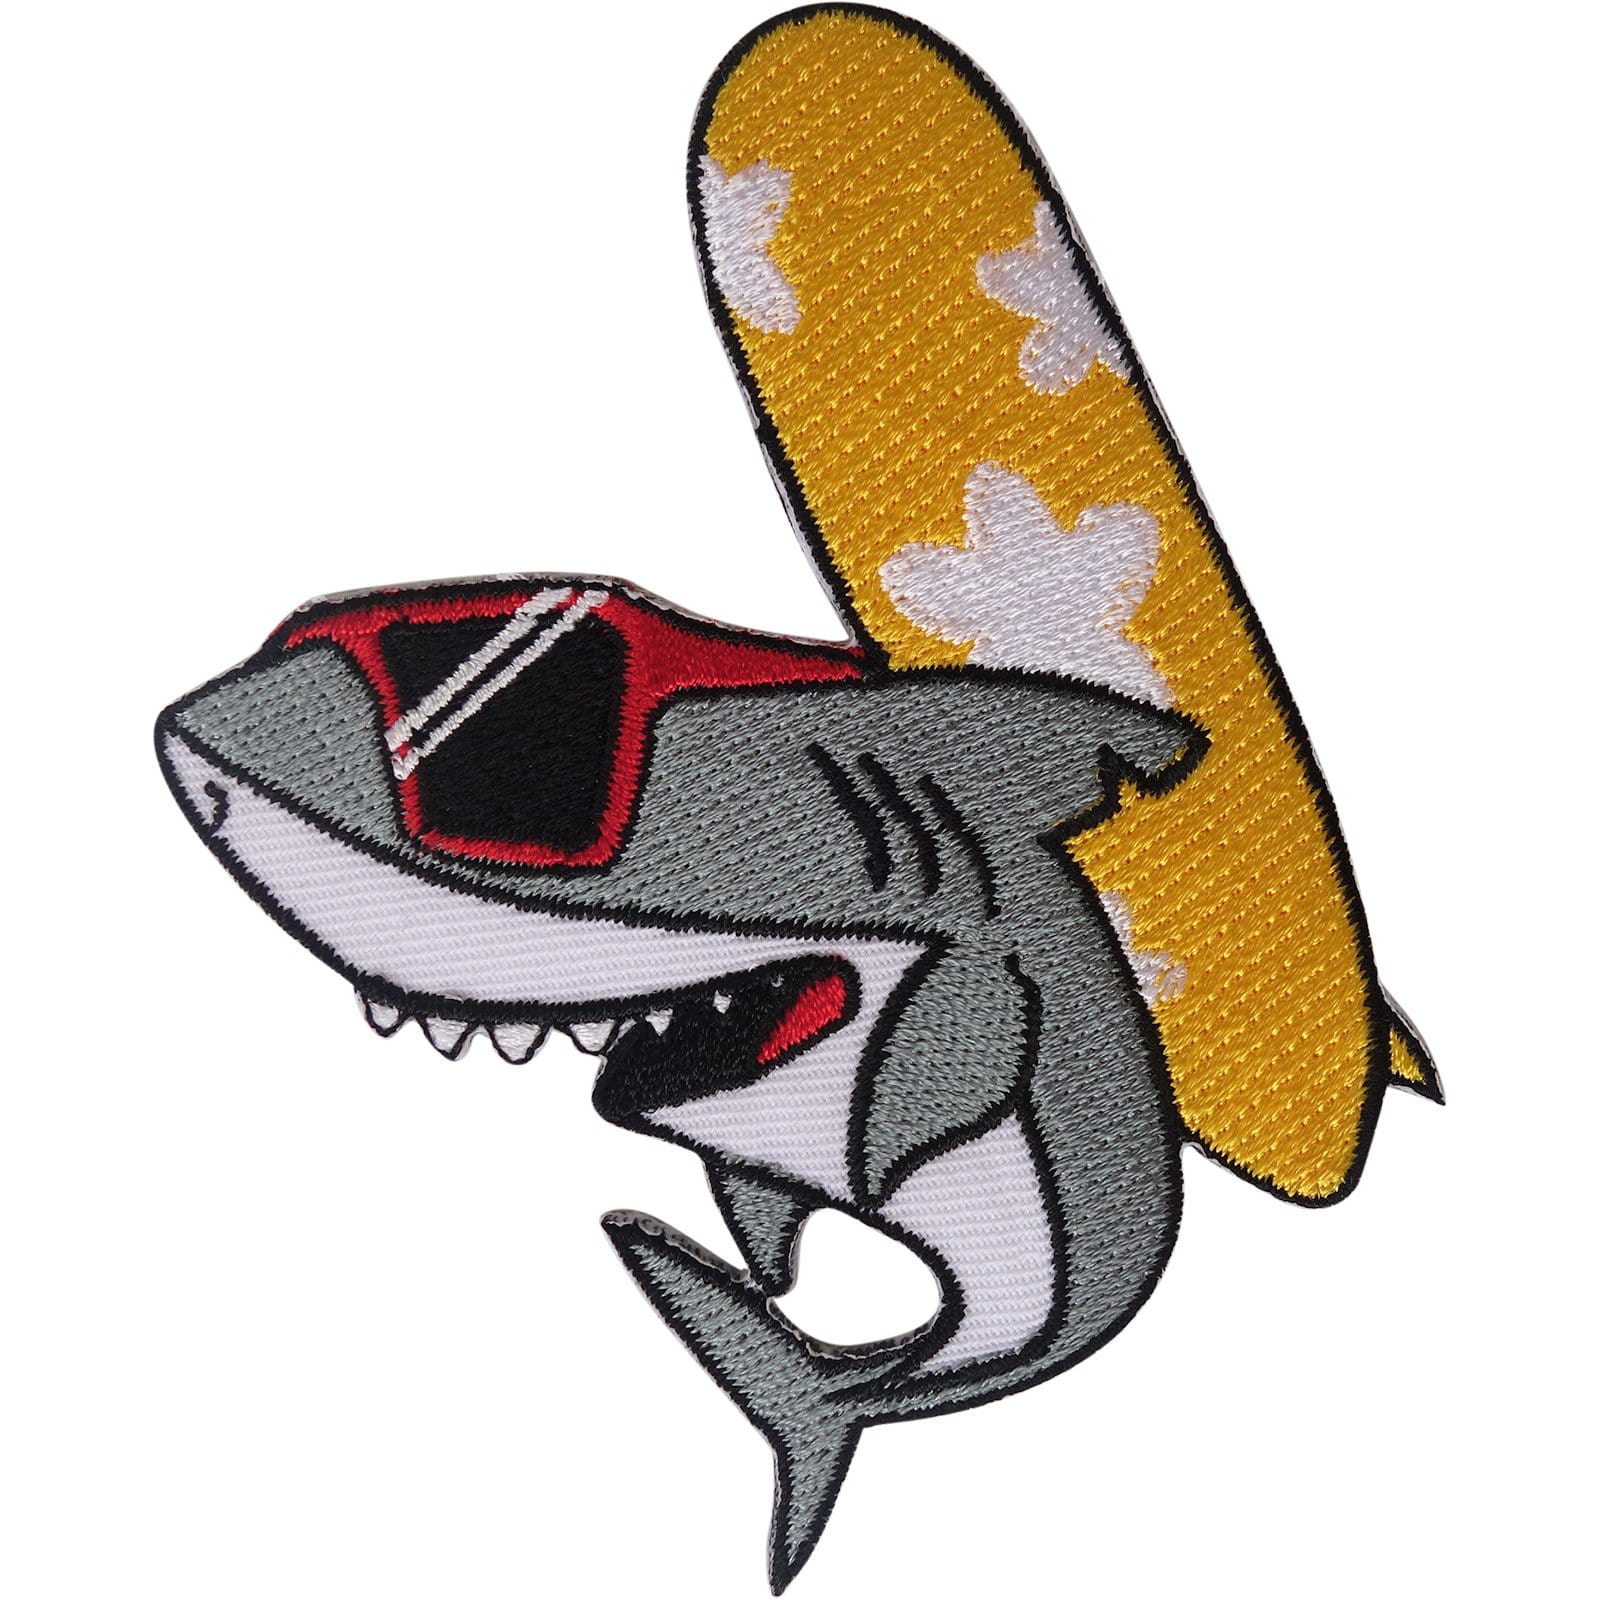 Surfer Shark Surfboard Patch Iron Sew On Clothes Fish Surfing Embroidered Badge